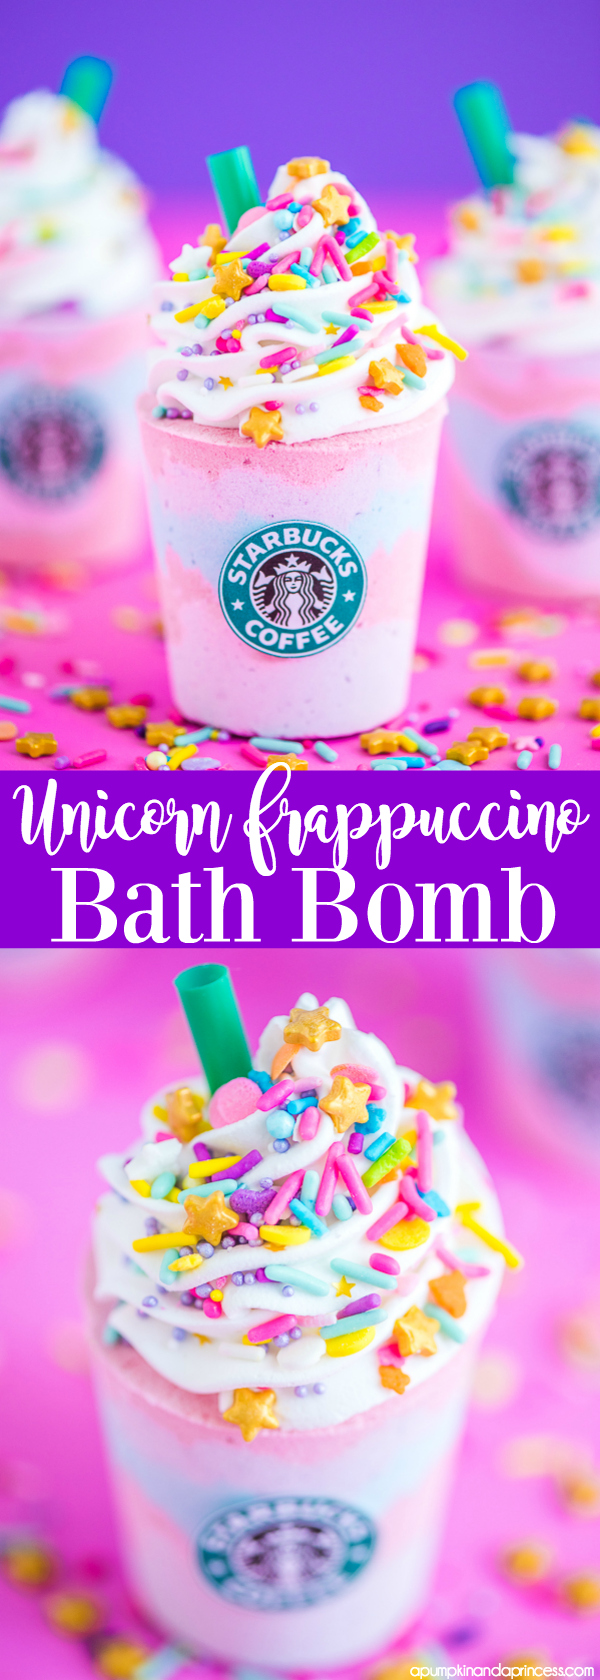 DIY Unicorn Frappuccino Bath Bomb – how to make Starbucks Unicorn Frappuccino inspired bath bombs with layers of pink, purple and blue. Then topped with icing, sprinkles and a classic green straw.